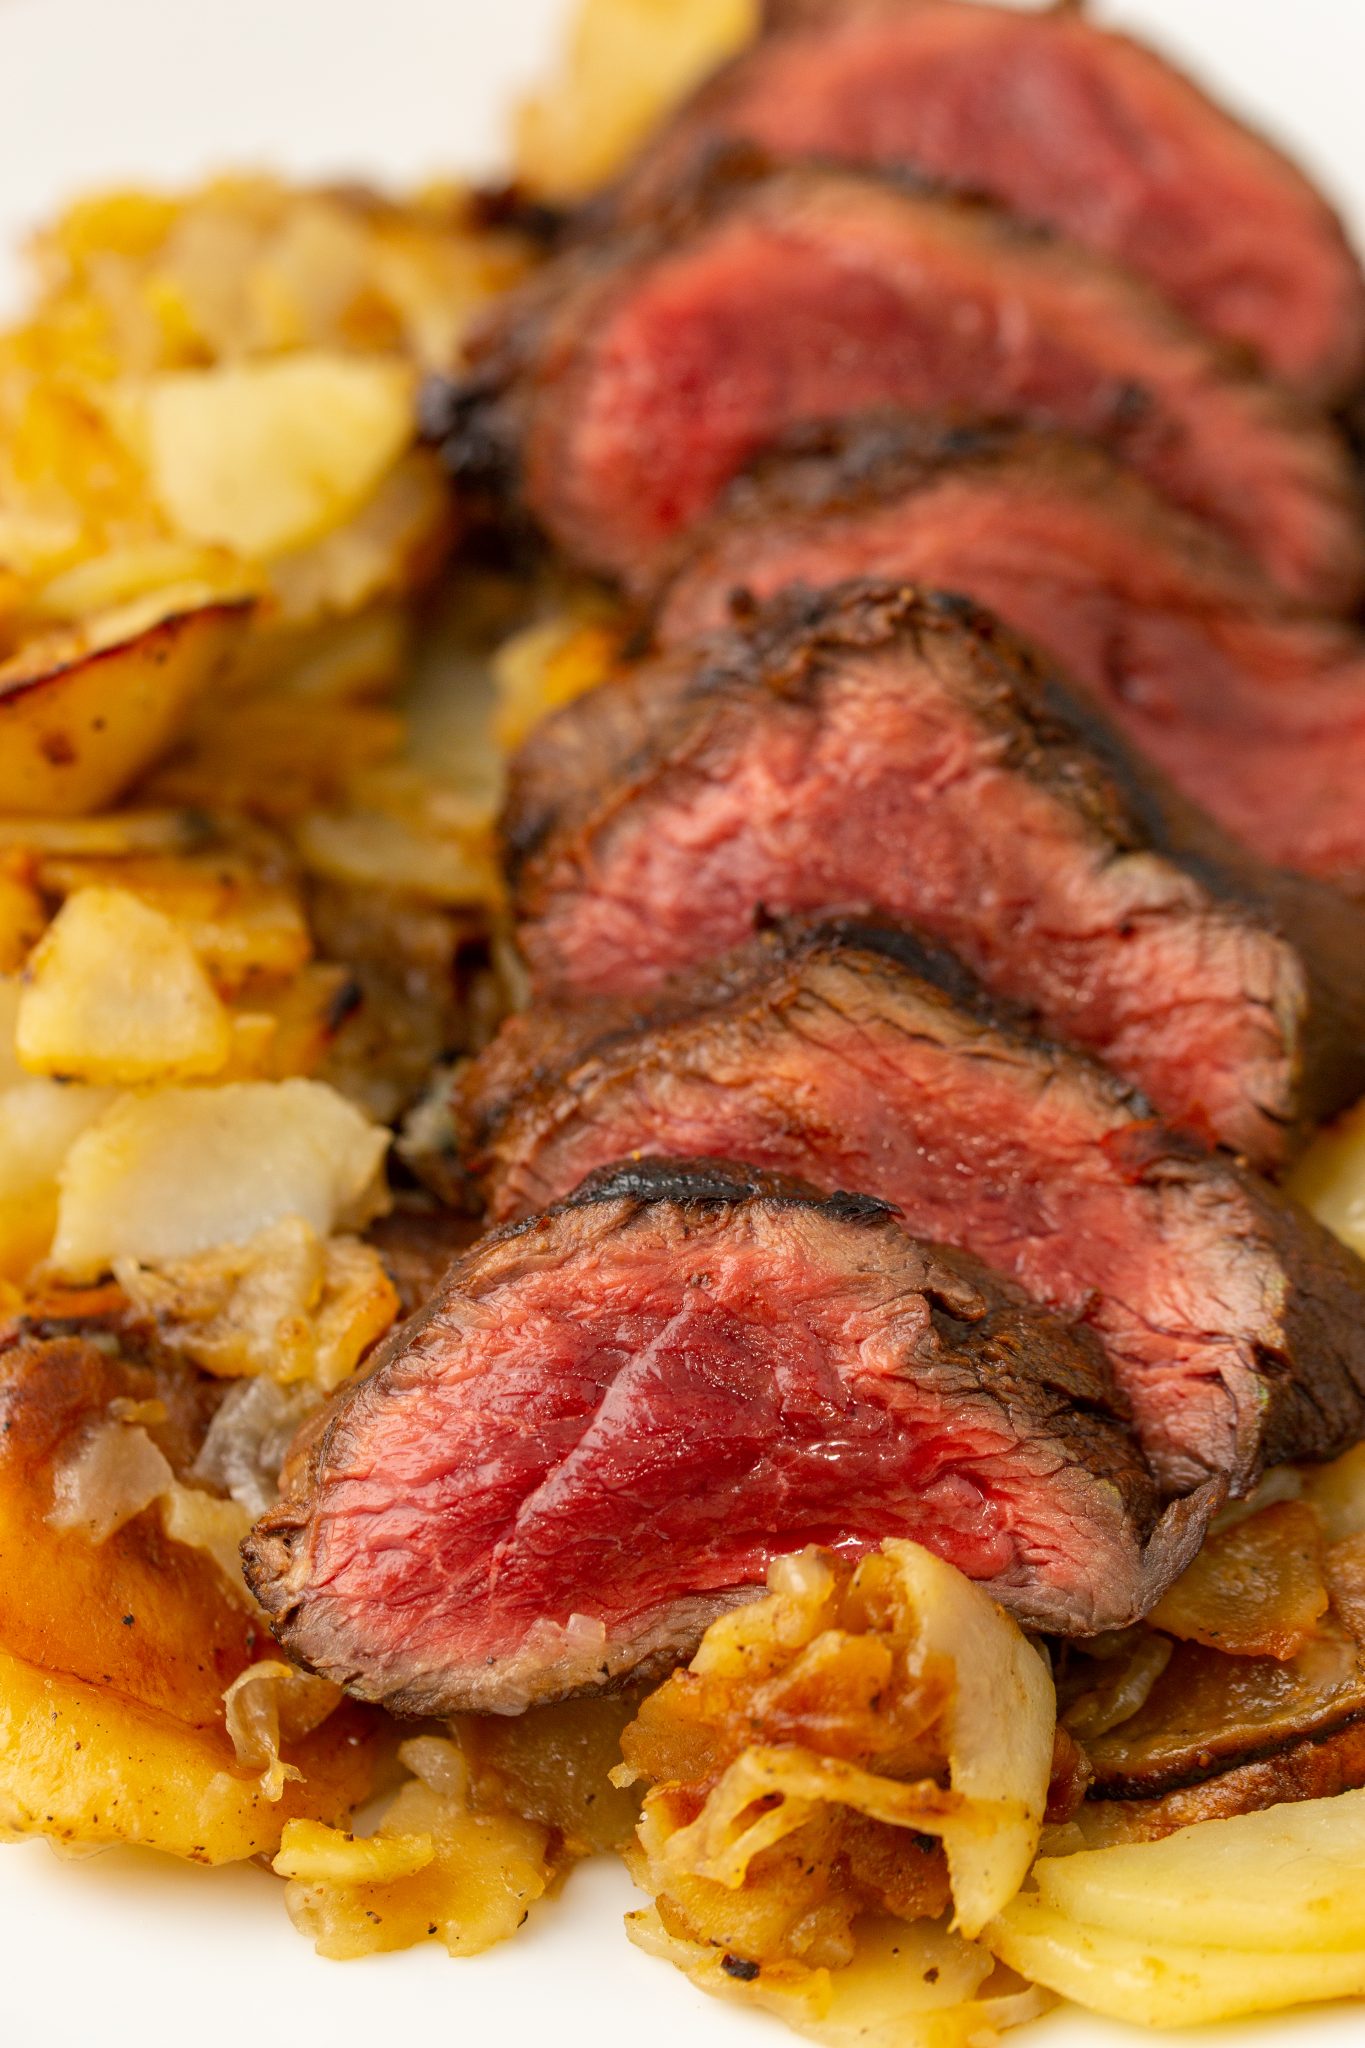 close up image of venison backstrap on a plate of sauted potatoes and onions